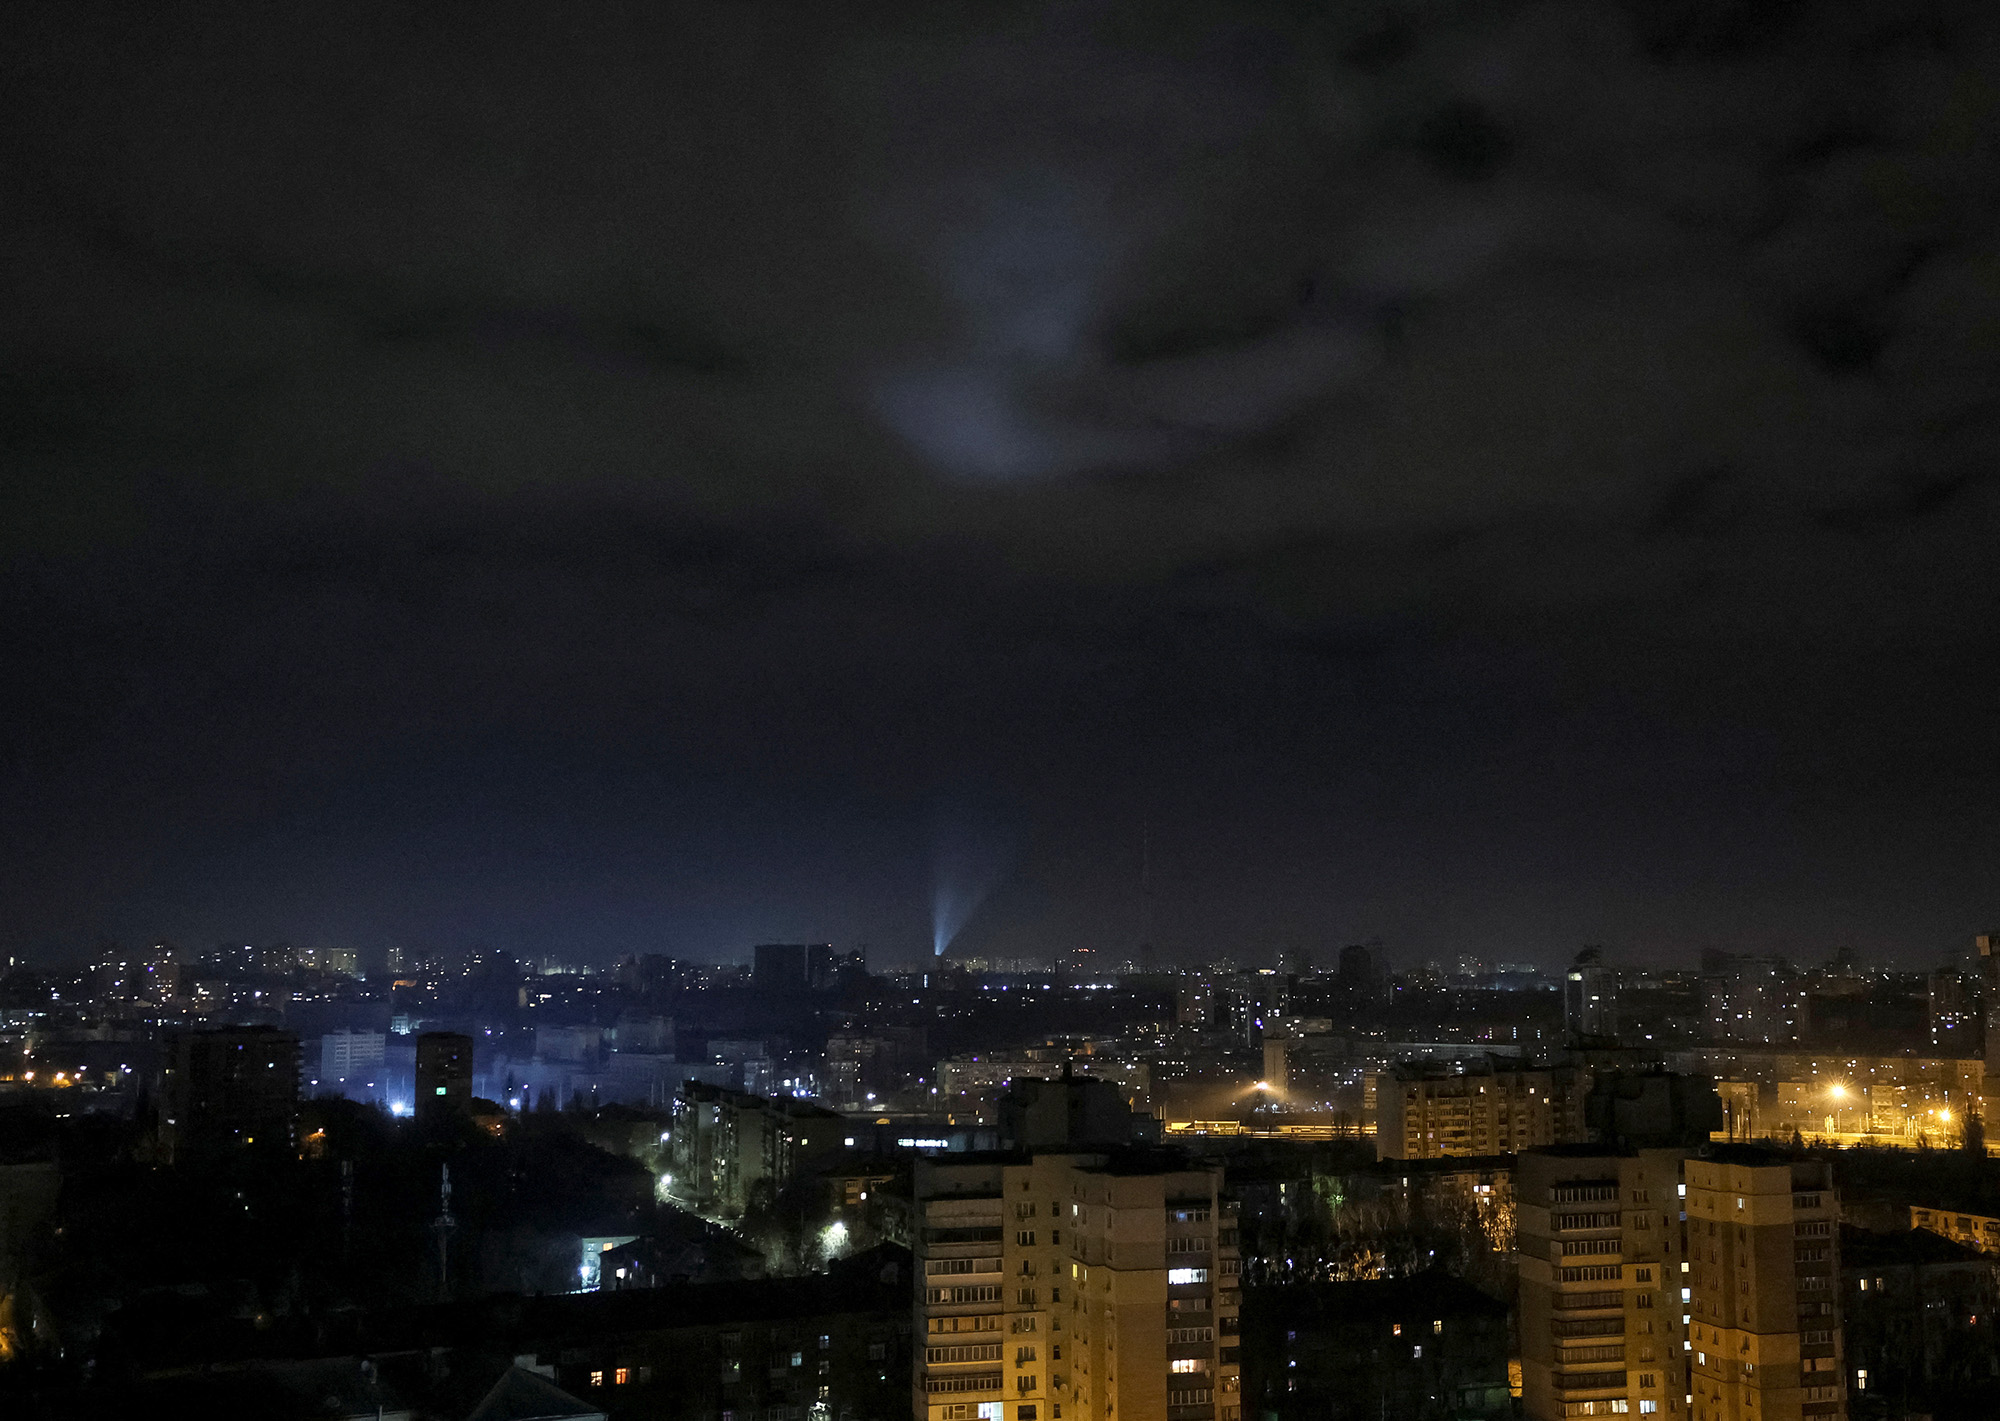 Ukrainian servicemen use searchlights as they search for drones in Kyiv, Ukraine, on January 1.